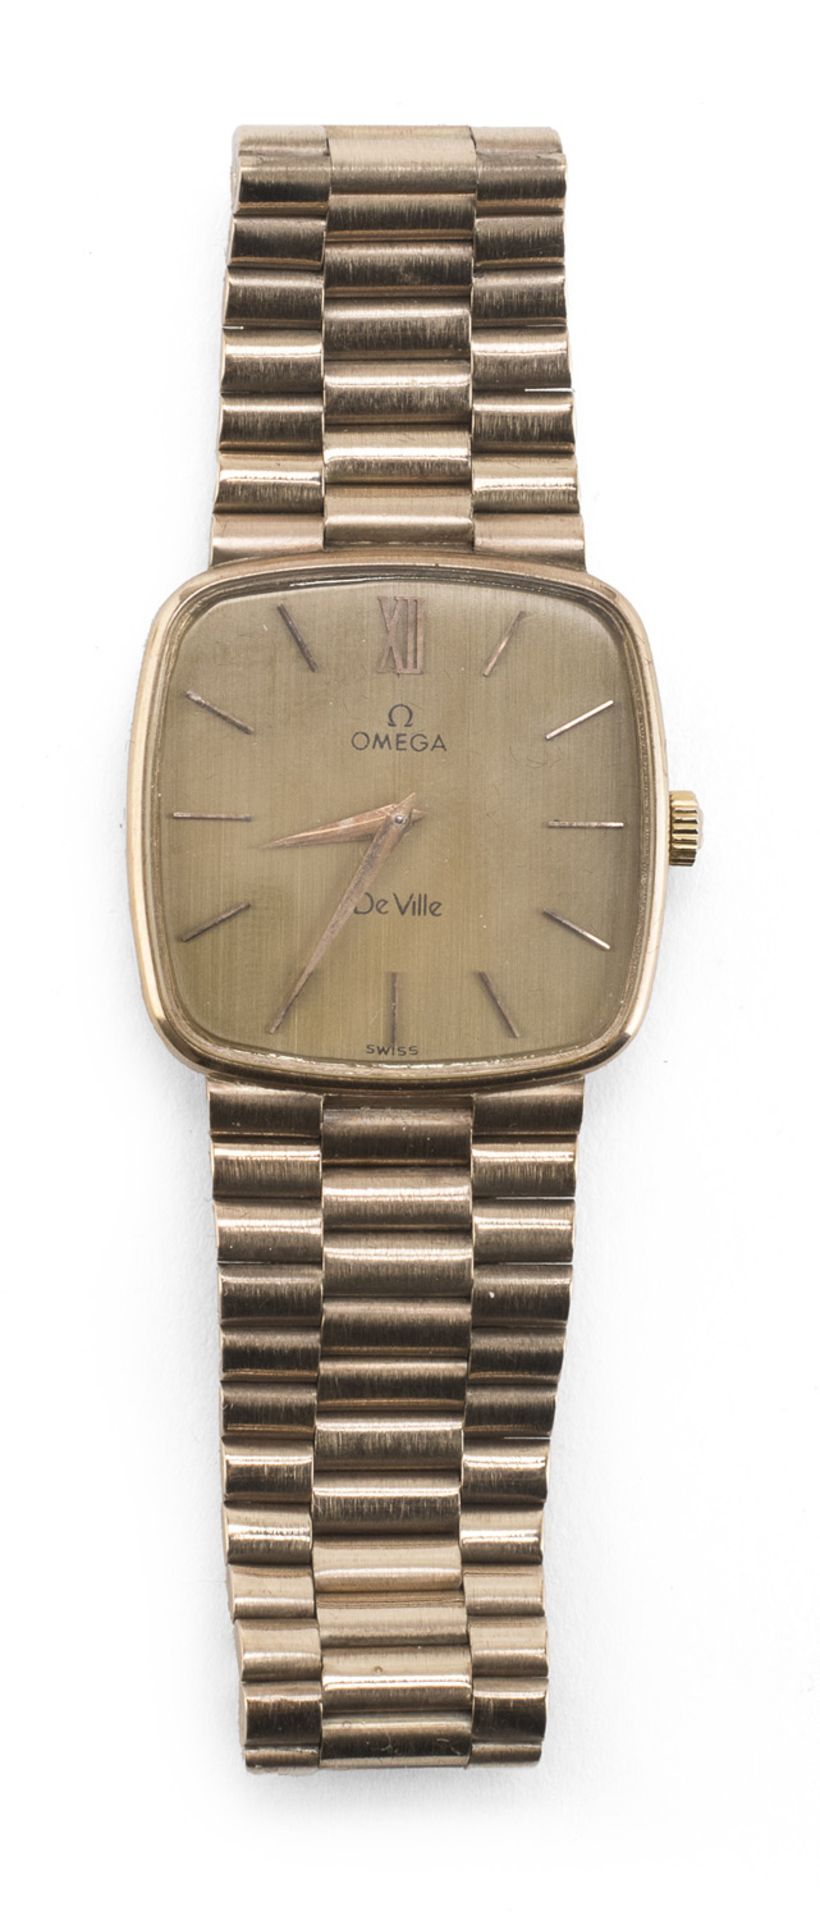 WRISTWATCH OMEGA BRAND IN GOLD